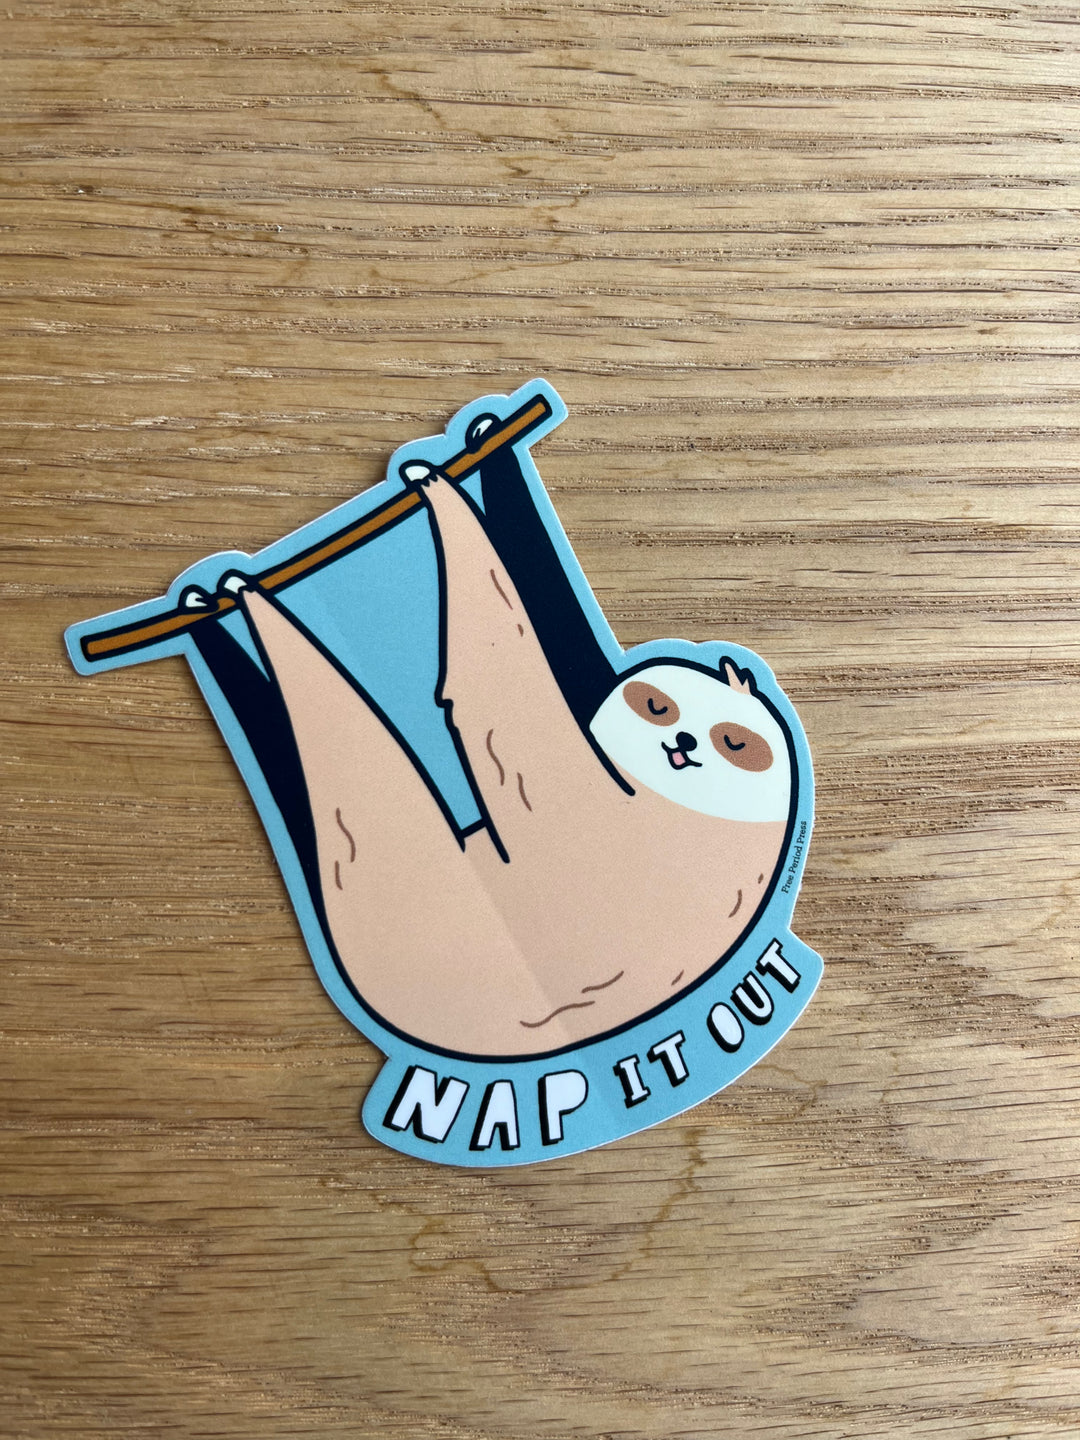 Nap It Out Sloth Vinyl Decal Sticker